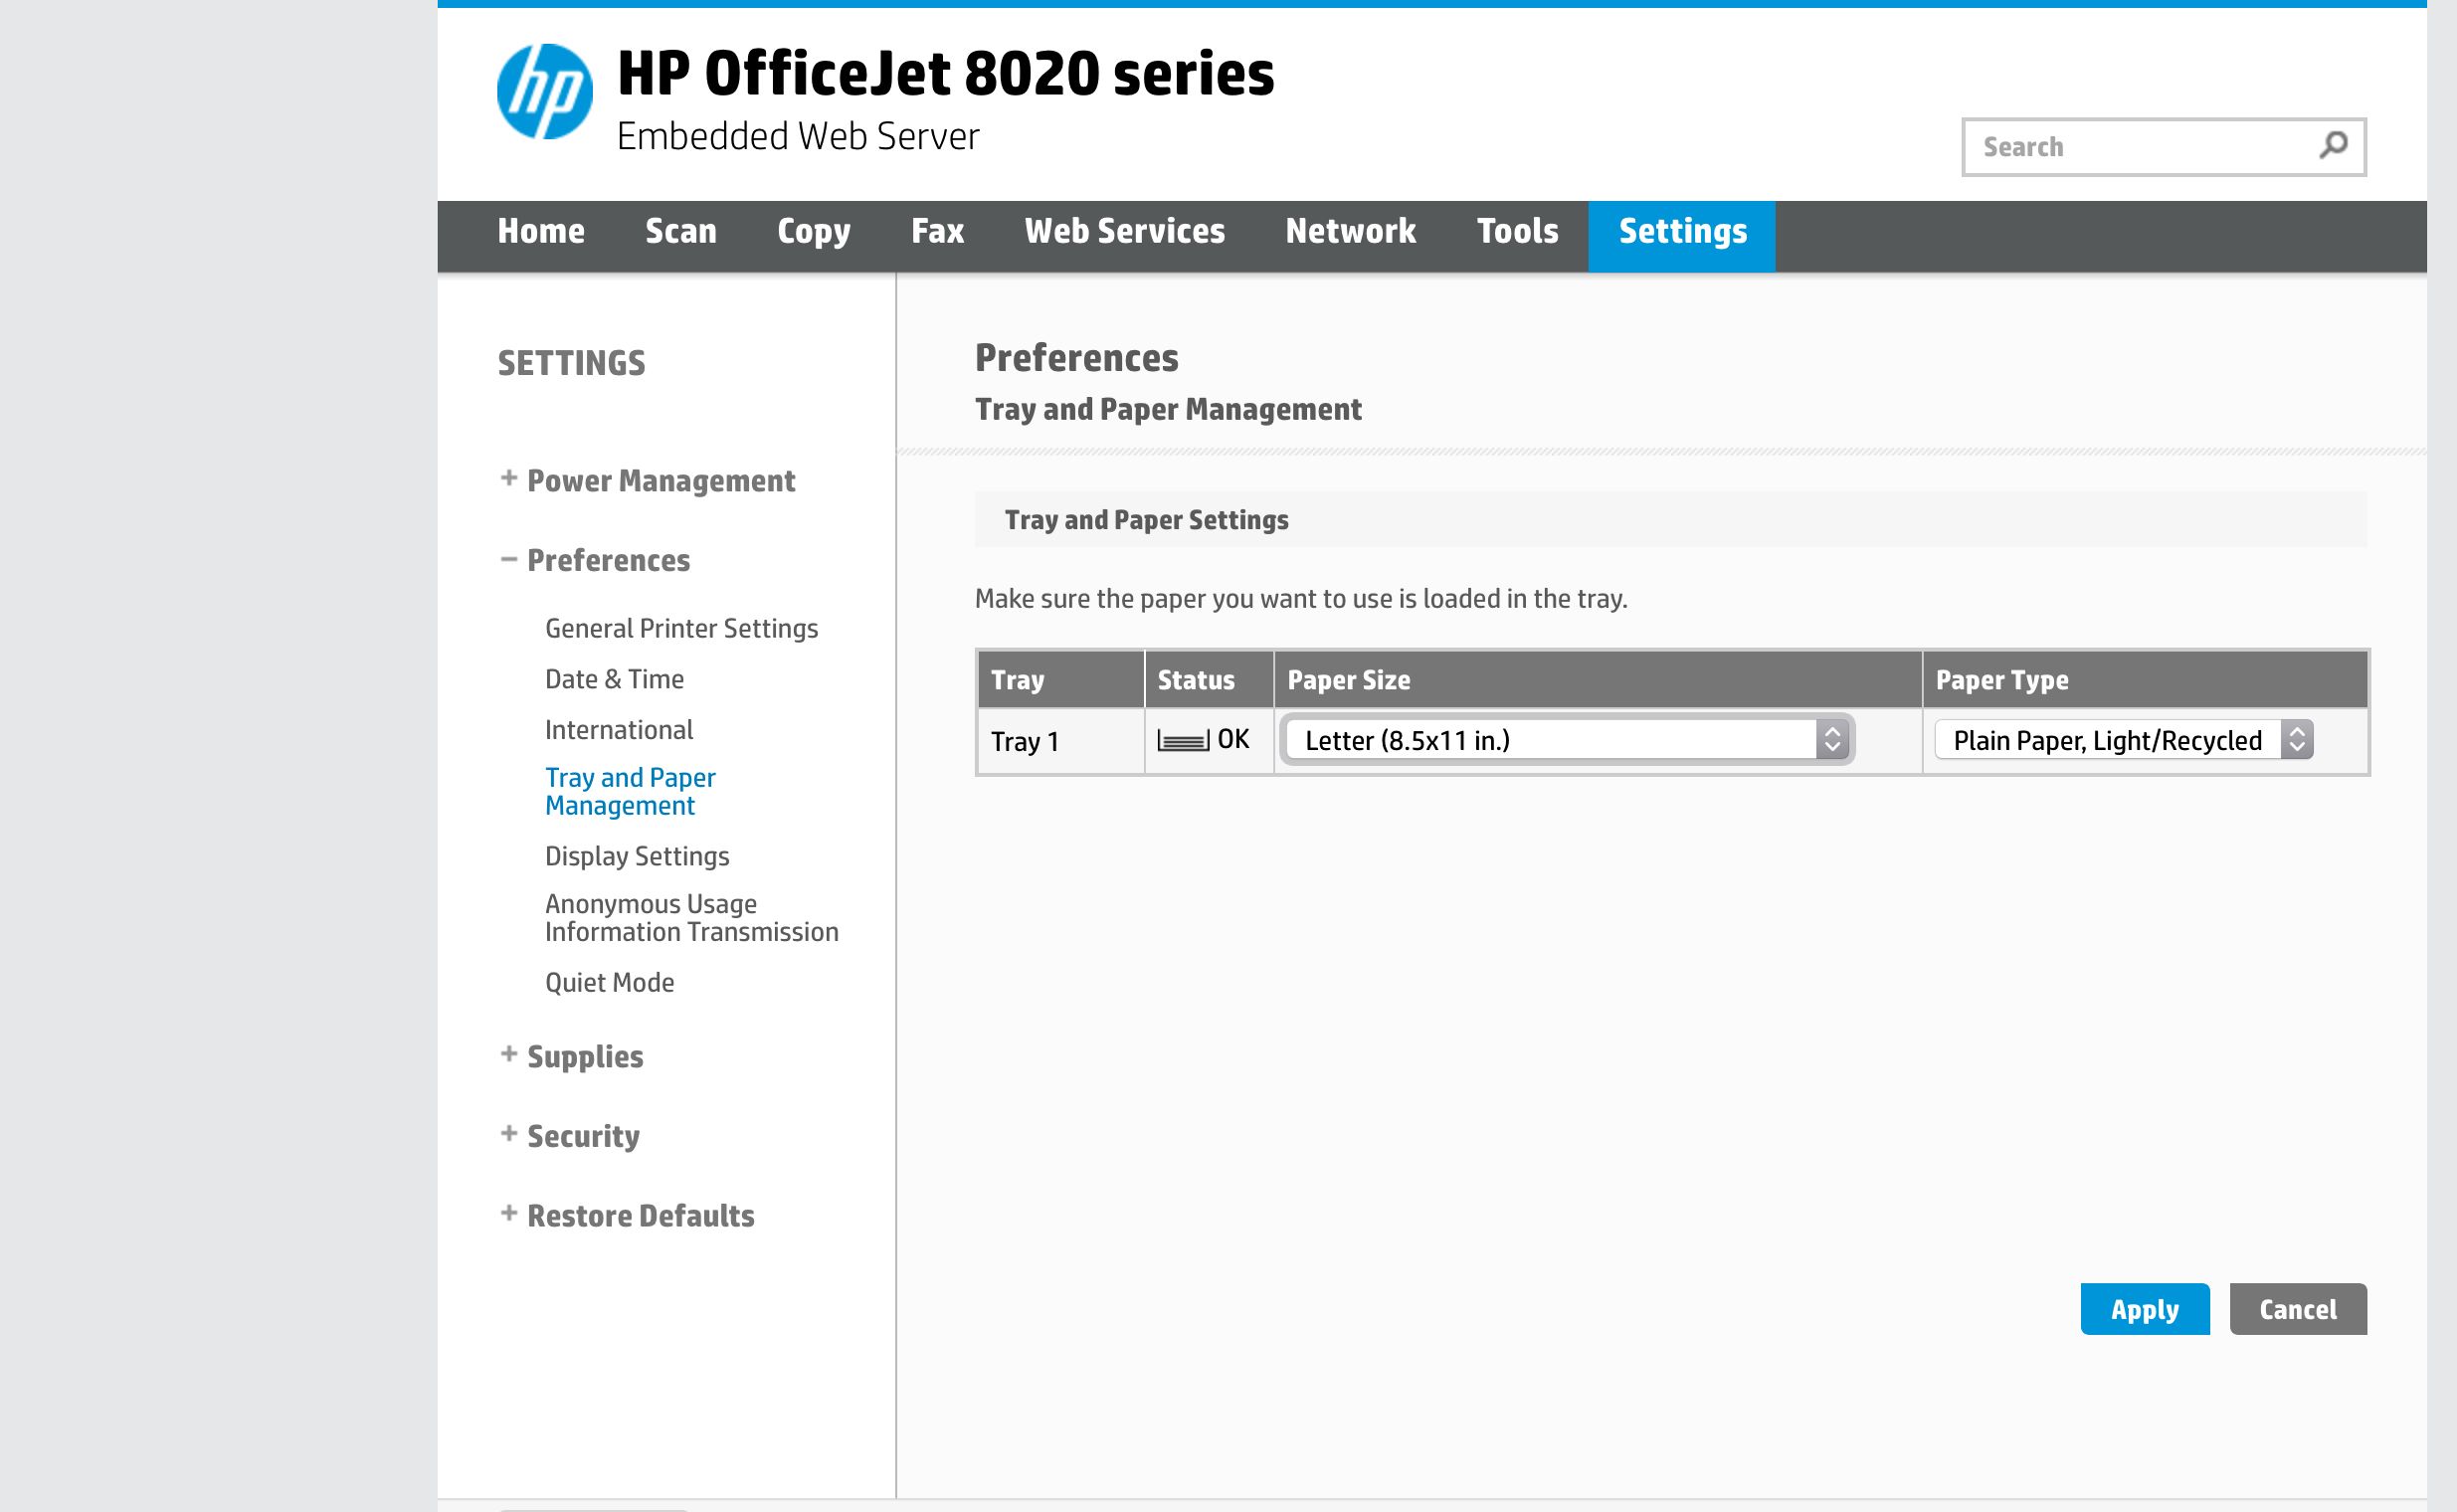 How To Change Print Size On HP Printer